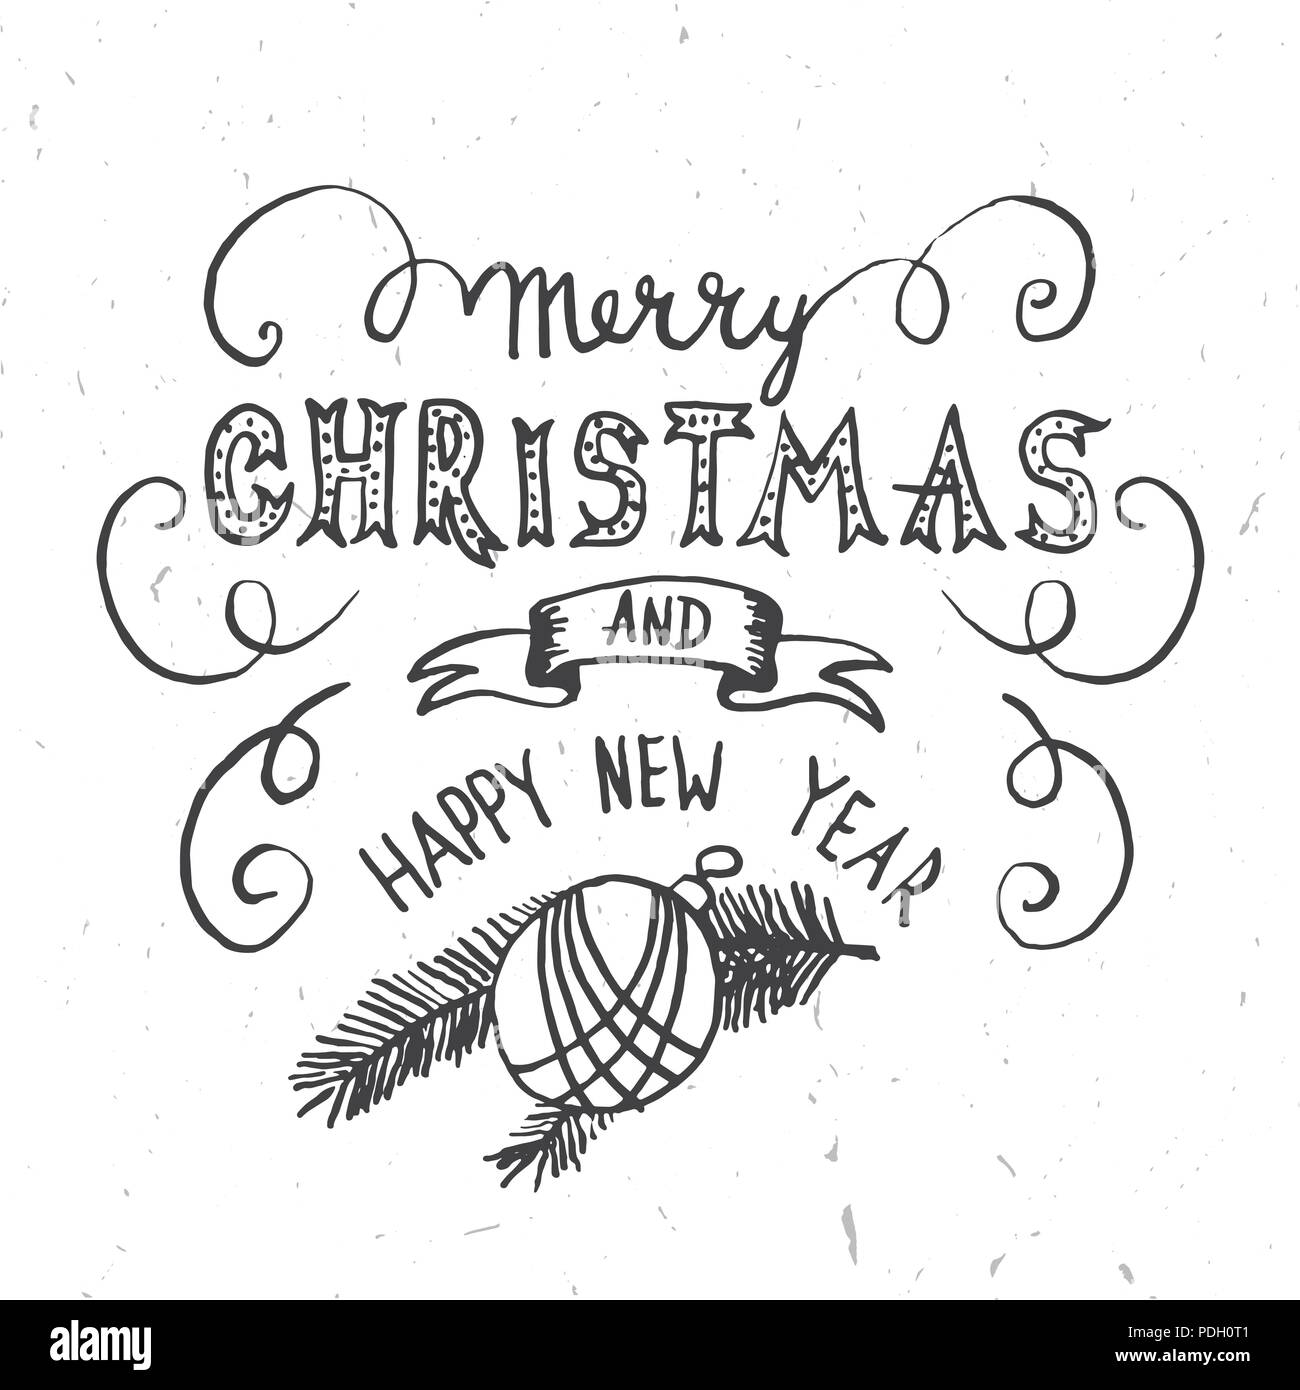 Merry Christmas Lettering Design. Vector illustration. Xmas design for congratulation cards, invitations, banners and flyers. Hand drawn holiday illus Stock Vector